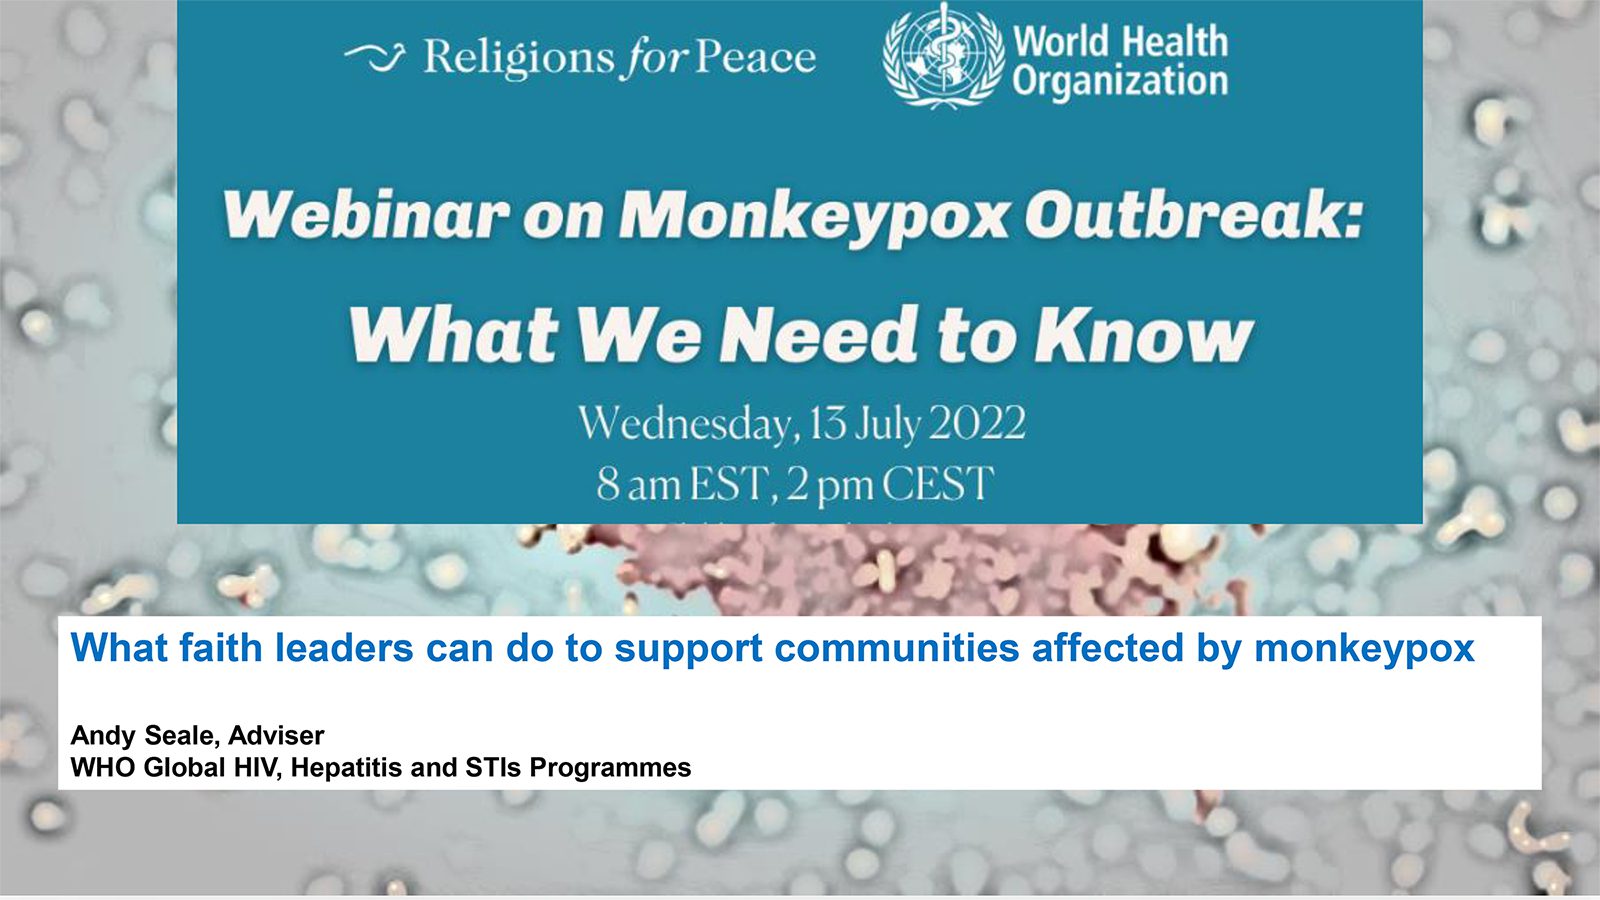 The World Health Organization and Religions for Peace webinar on the current monkeypox outbreak, July 13, 2022. Courtesy image